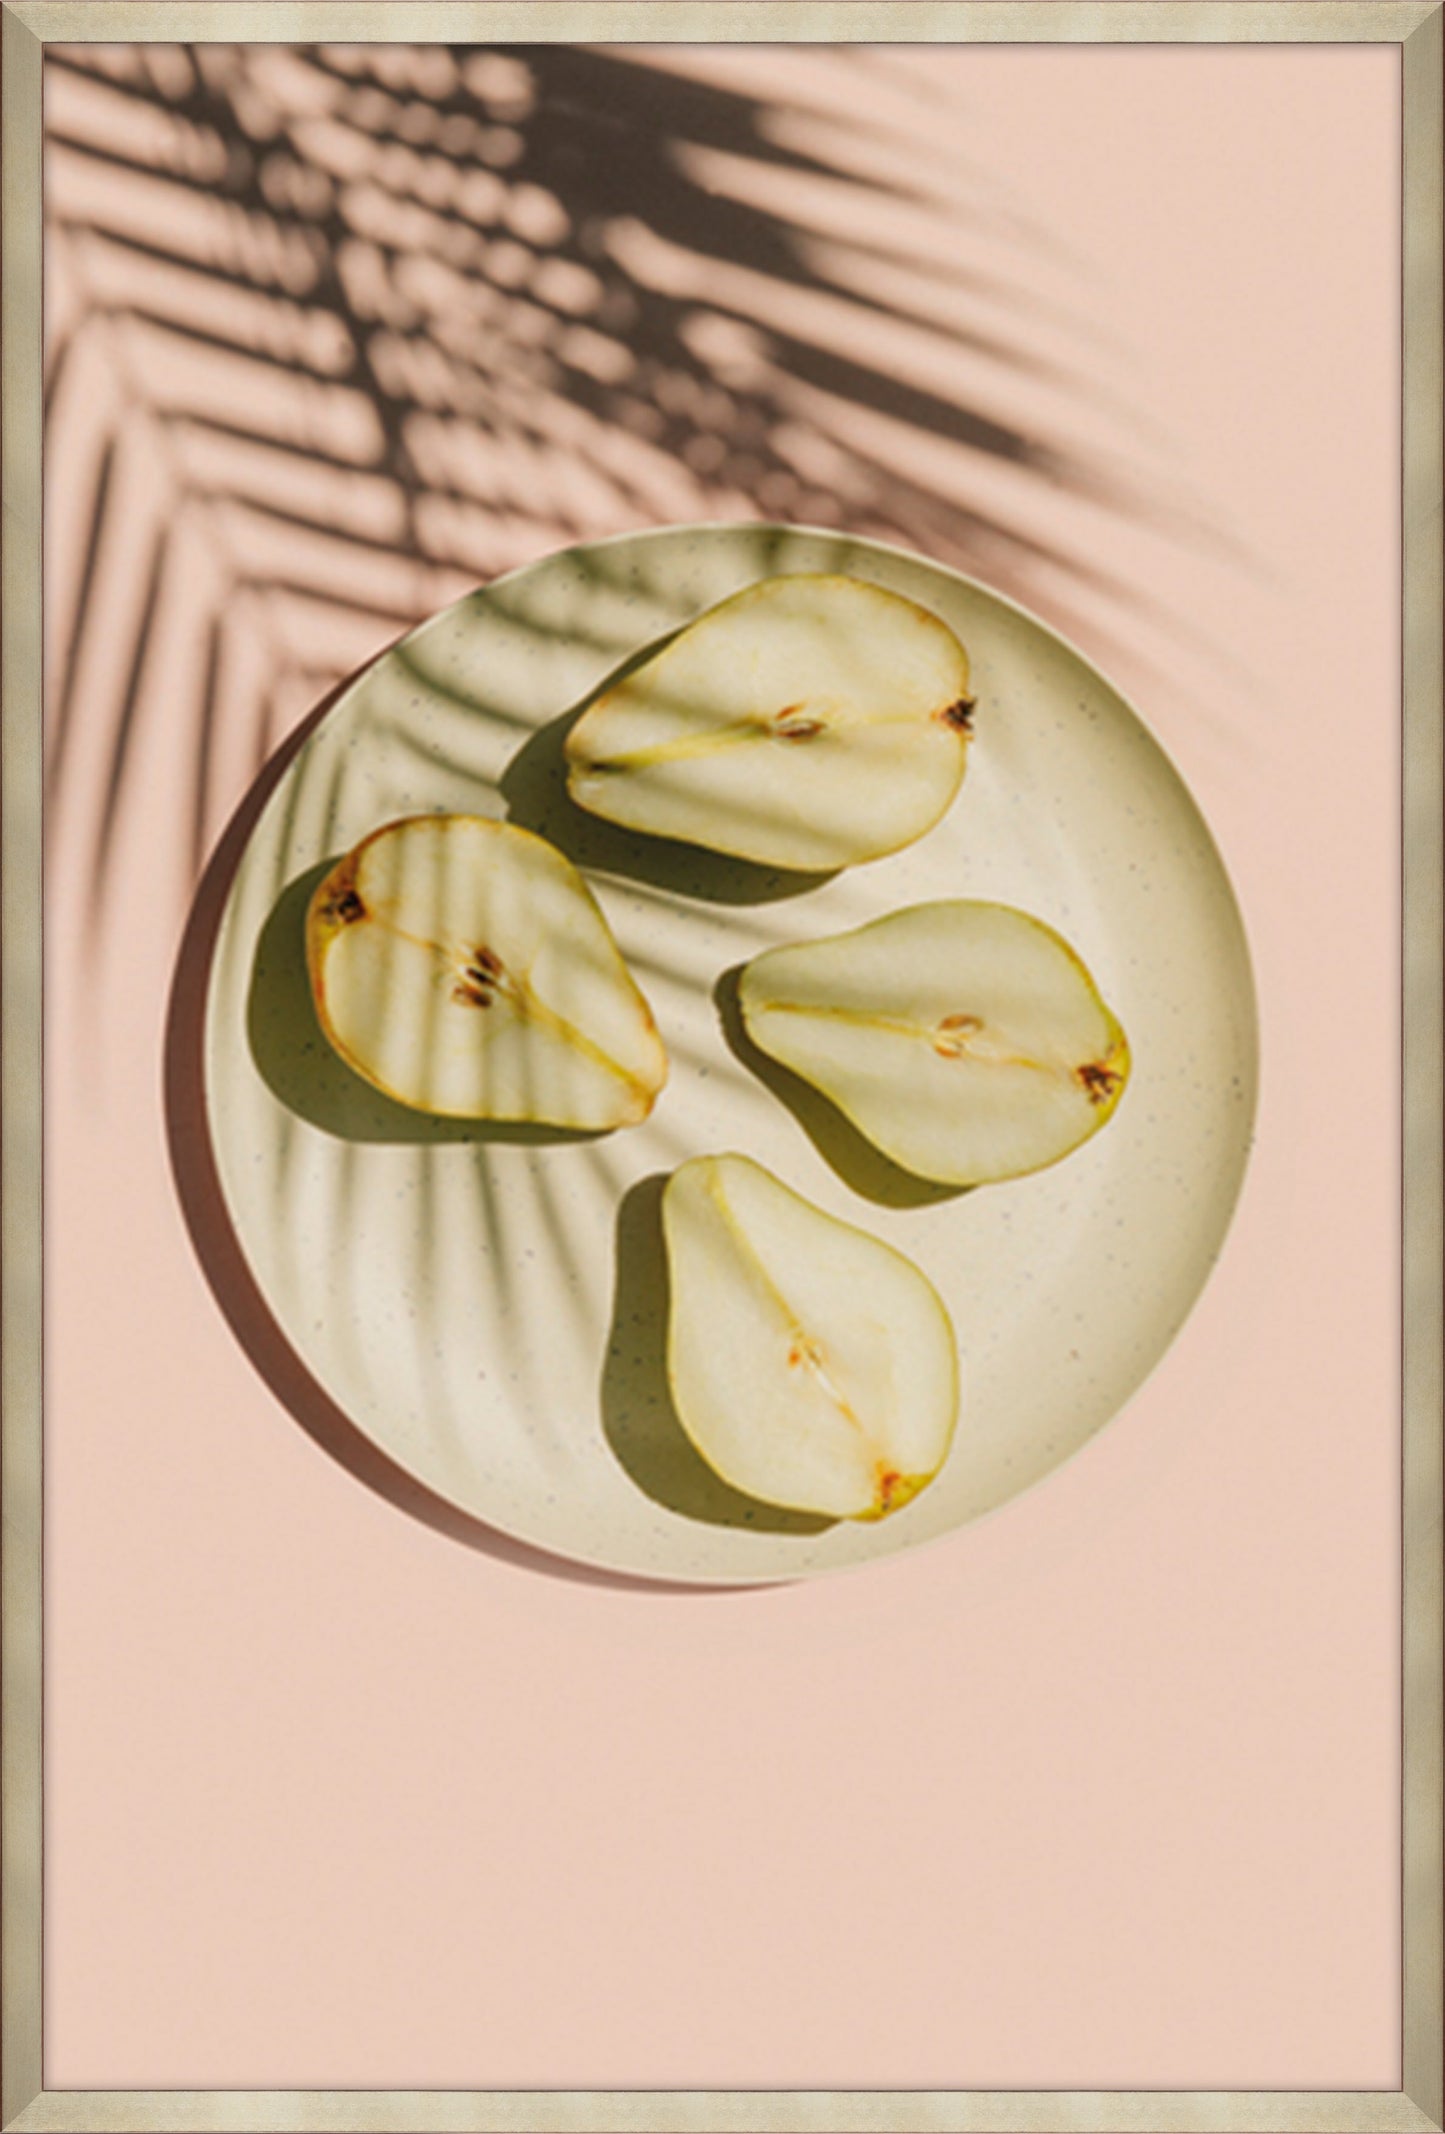 Pear Plate - Shade - In Stock